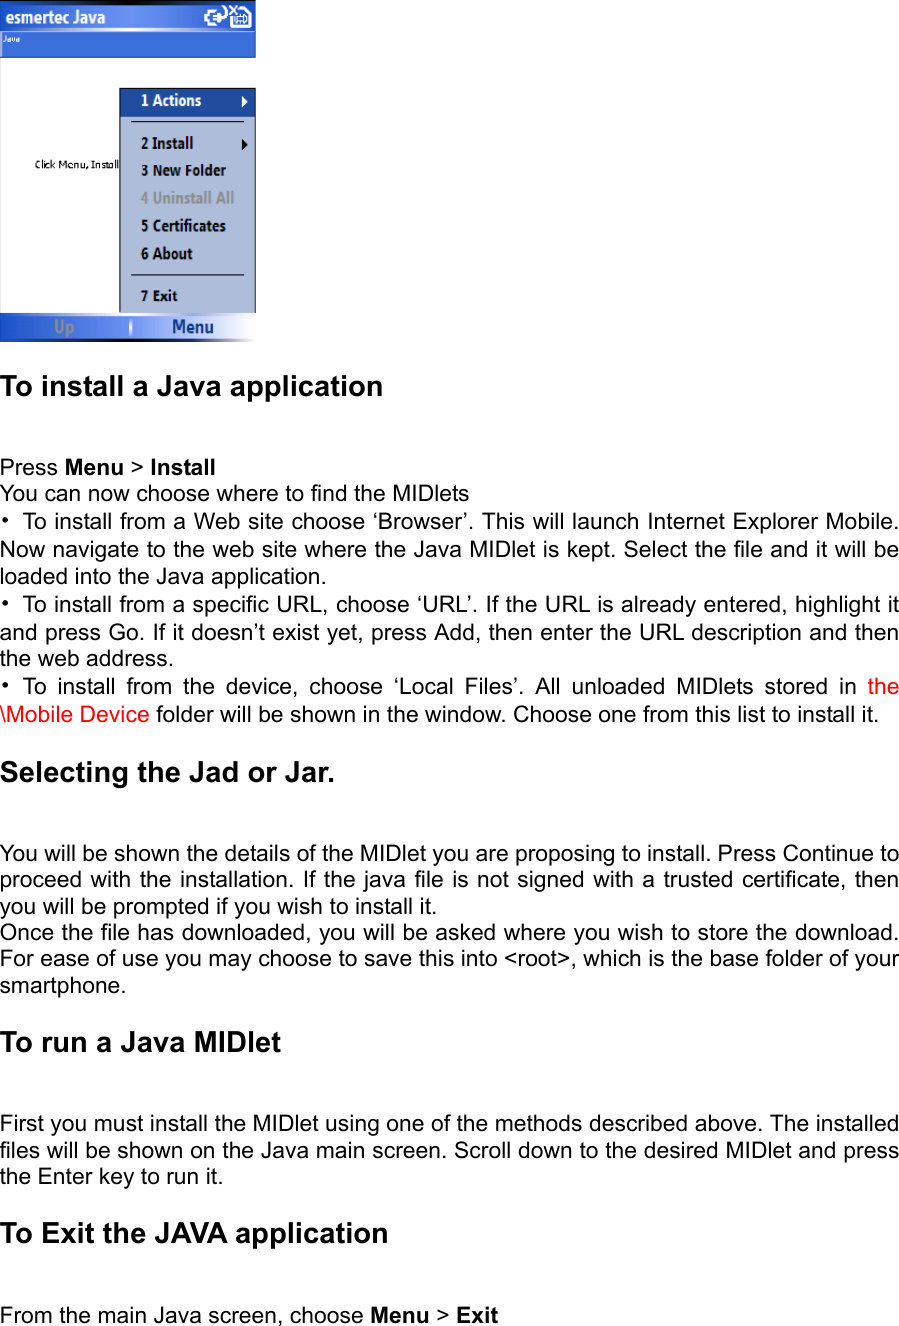   To install a Java application   Press Menu &gt; Install  You can now choose where to find the MIDlets   •  To install from a Web site choose ‘Browser’. This will launch Internet Explorer Mobile. Now navigate to the web site where the Java MIDlet is kept. Select the file and it will be loaded into the Java application.   •  To install from a specific URL, choose ‘URL’. If the URL is already entered, highlight it and press Go. If it doesn’t exist yet, press Add, then enter the URL description and then the web address.   • To install from the device, choose ‘Local Files’. All unloaded MIDlets stored in the \Mobile Device folder will be shown in the window. Choose one from this list to install it. Selecting the Jad or Jar.   You will be shown the details of the MIDlet you are proposing to install. Press Continue to proceed with the installation. If the java file is not signed with a trusted certificate, then you will be prompted if you wish to install it.   Once the file has downloaded, you will be asked where you wish to store the download. For ease of use you may choose to save this into &lt;root&gt;, which is the base folder of your smartphone. To run a Java MIDlet   First you must install the MIDlet using one of the methods described above. The installed files will be shown on the Java main screen. Scroll down to the desired MIDlet and press the Enter key to run it. To Exit the JAVA application   From the main Java screen, choose Menu &gt; Exit 